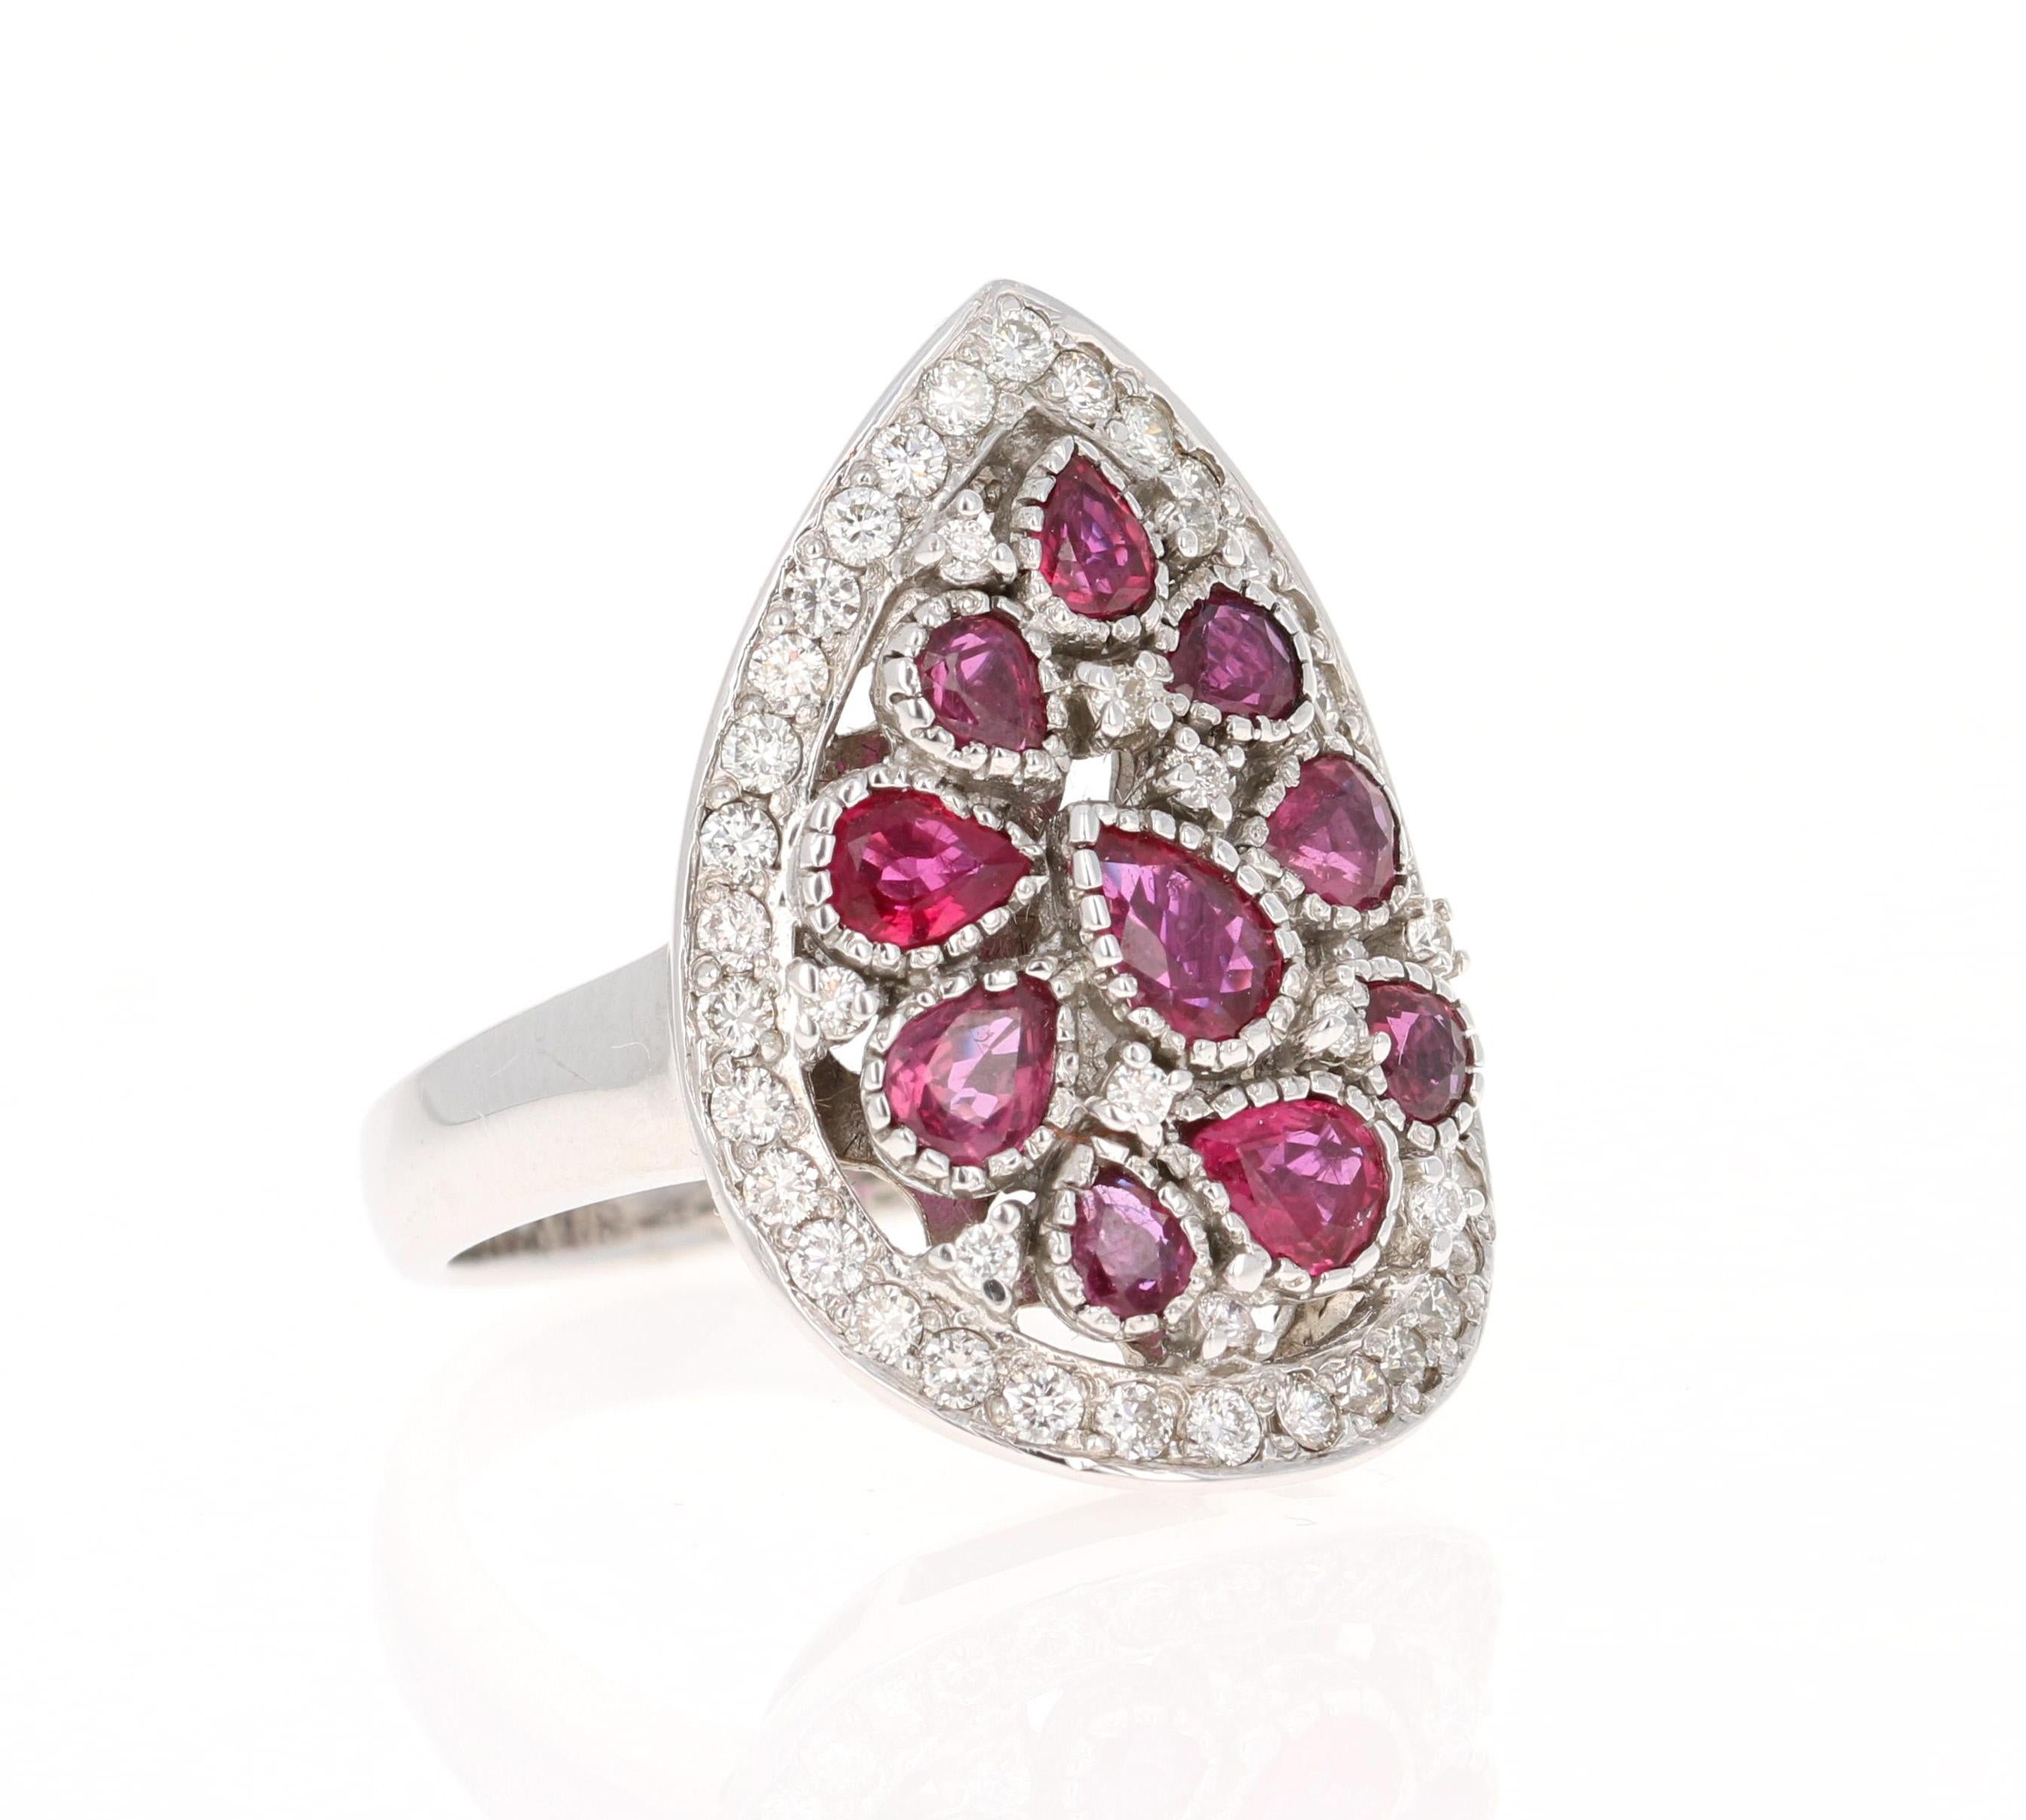 This ring has multiple Pear Cut Natural Red Rubies weighing 1.83 Carats and 41 Round Cut Diamonds weighing 0.51 Carats. The clarity and color of the diamonds are VS-H. The total carat weight of the ring is 2.34 Carats. 

The ring is beautifully